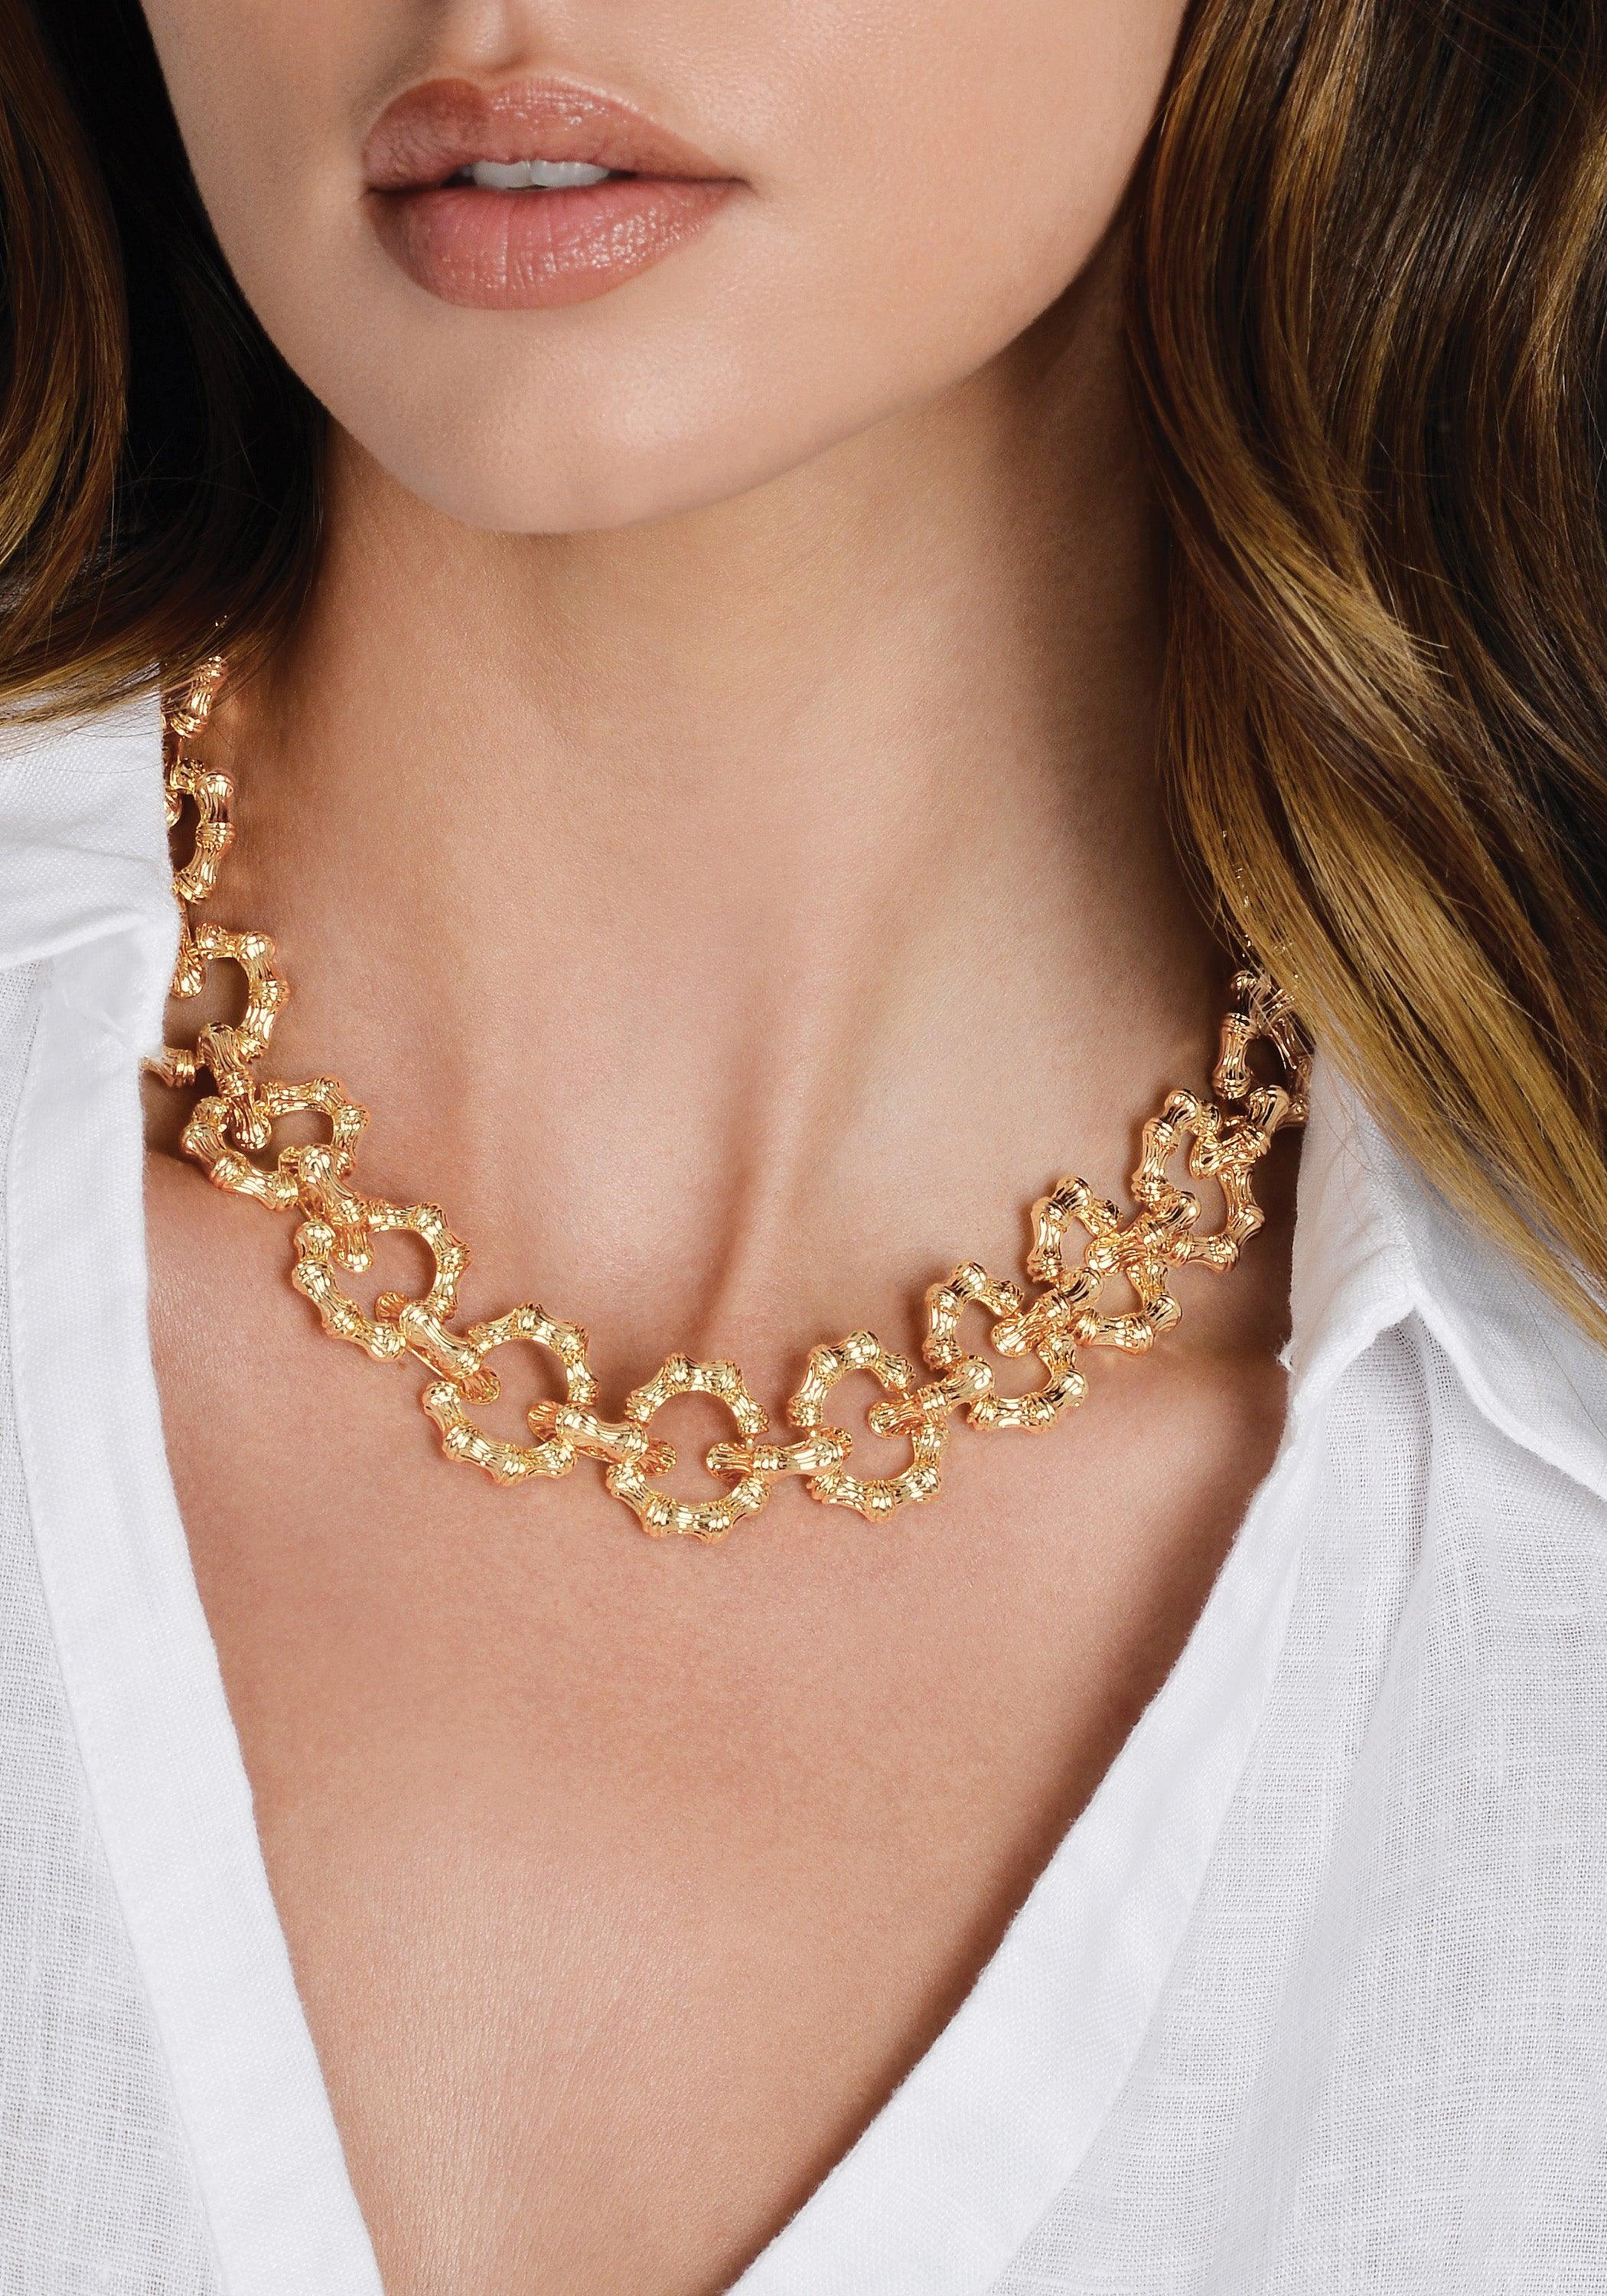 Bamboo Chain Necklace - Anabel Aram